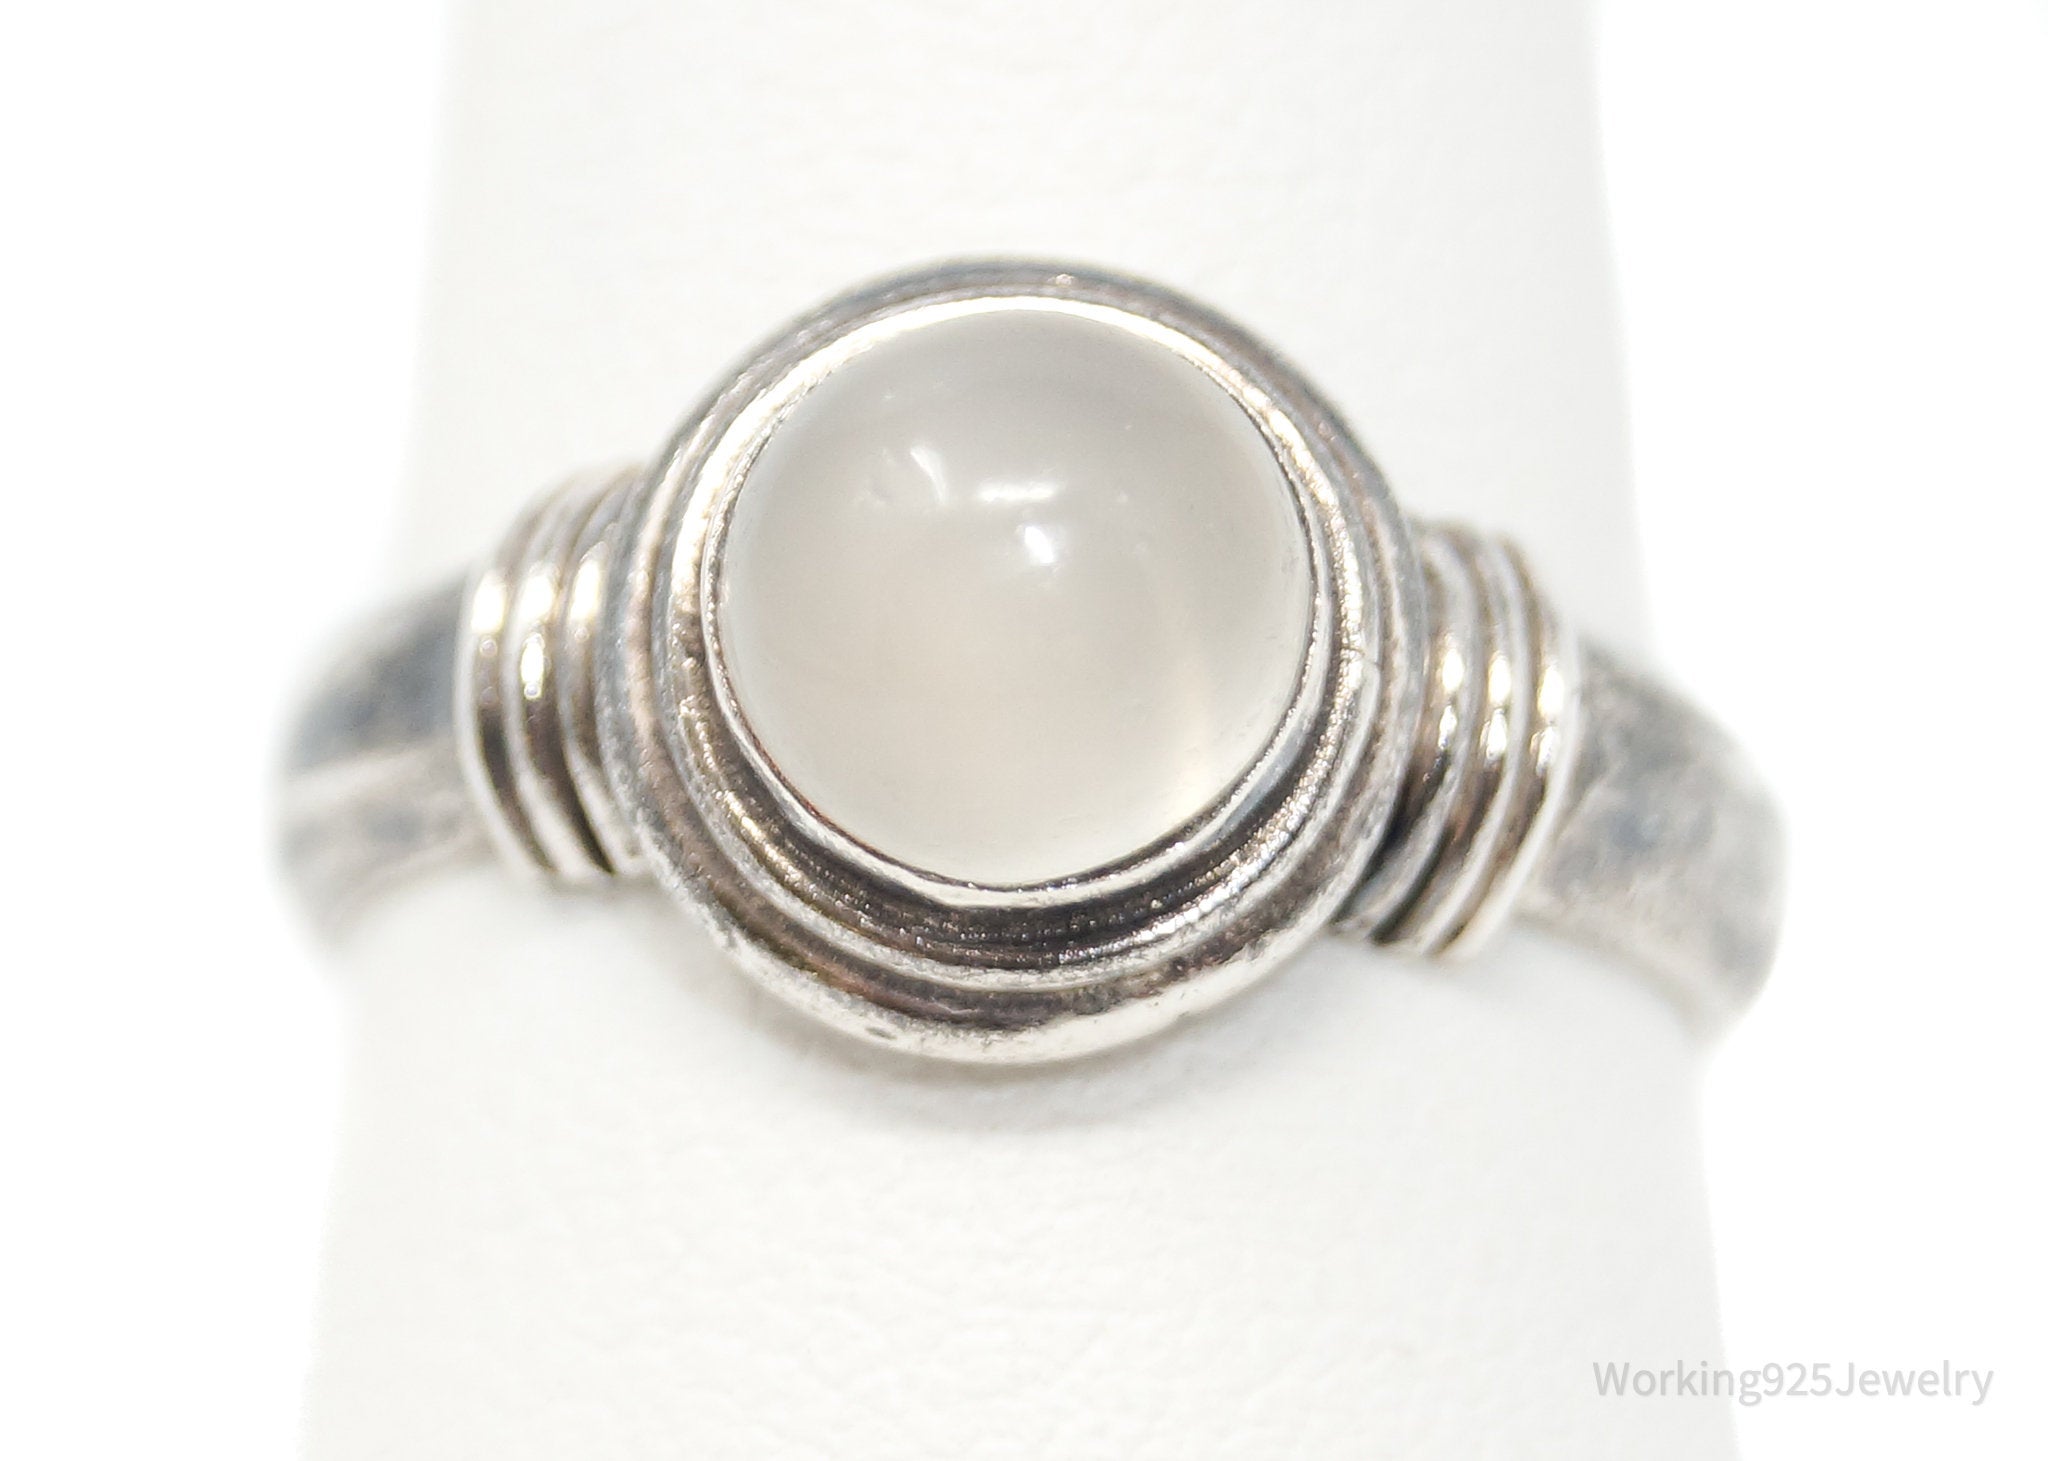 Vintage White Moonstone Sterling Silver Ring - Size 7